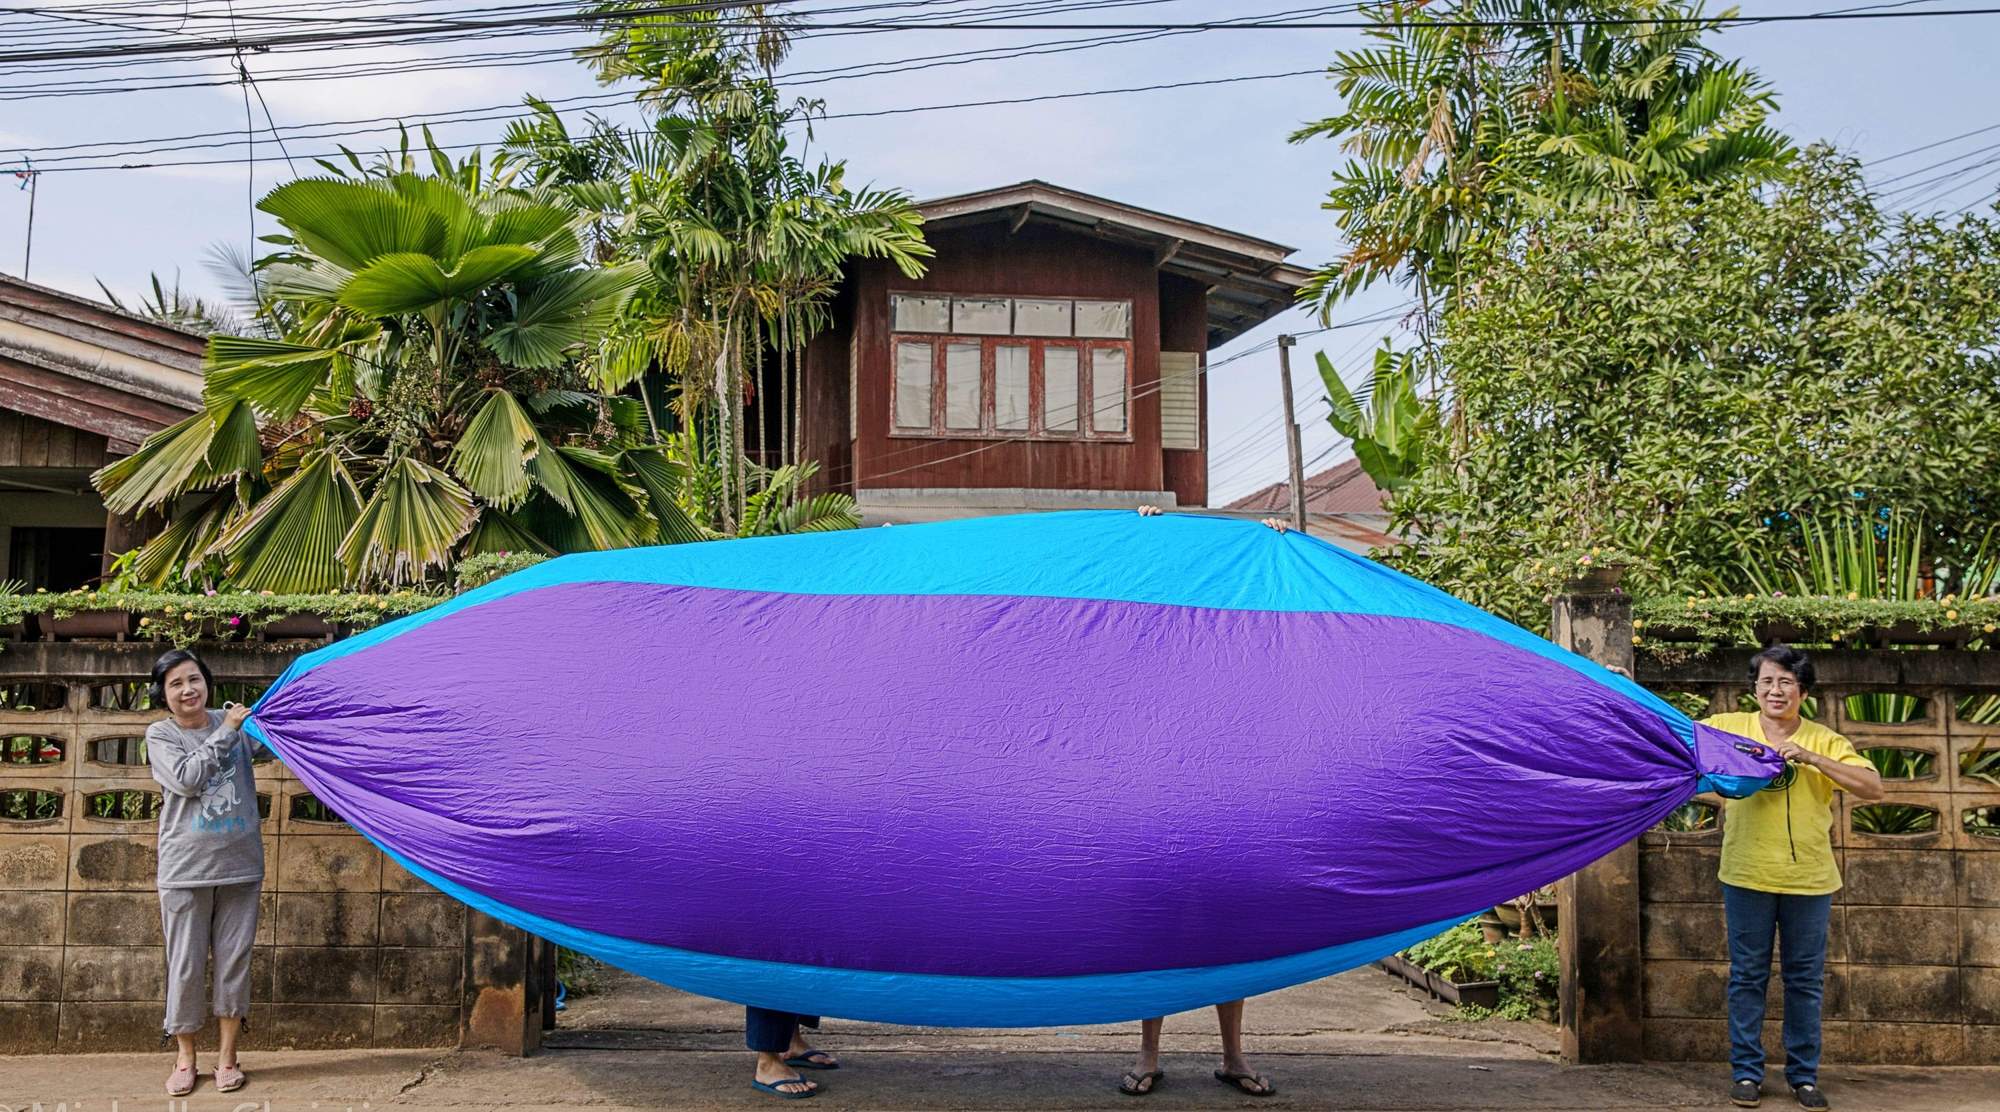 https://www.flyingsquirreloutfitters.com/cdn/shop/articles/flying-squirrel-outfitters-hammock-basecamp-hammock-purple-aqua-2010684227625_2000x_5e8bb51c-47fa-4146-a073-4d6934d8e125_2000x.jpg?v=1626610363